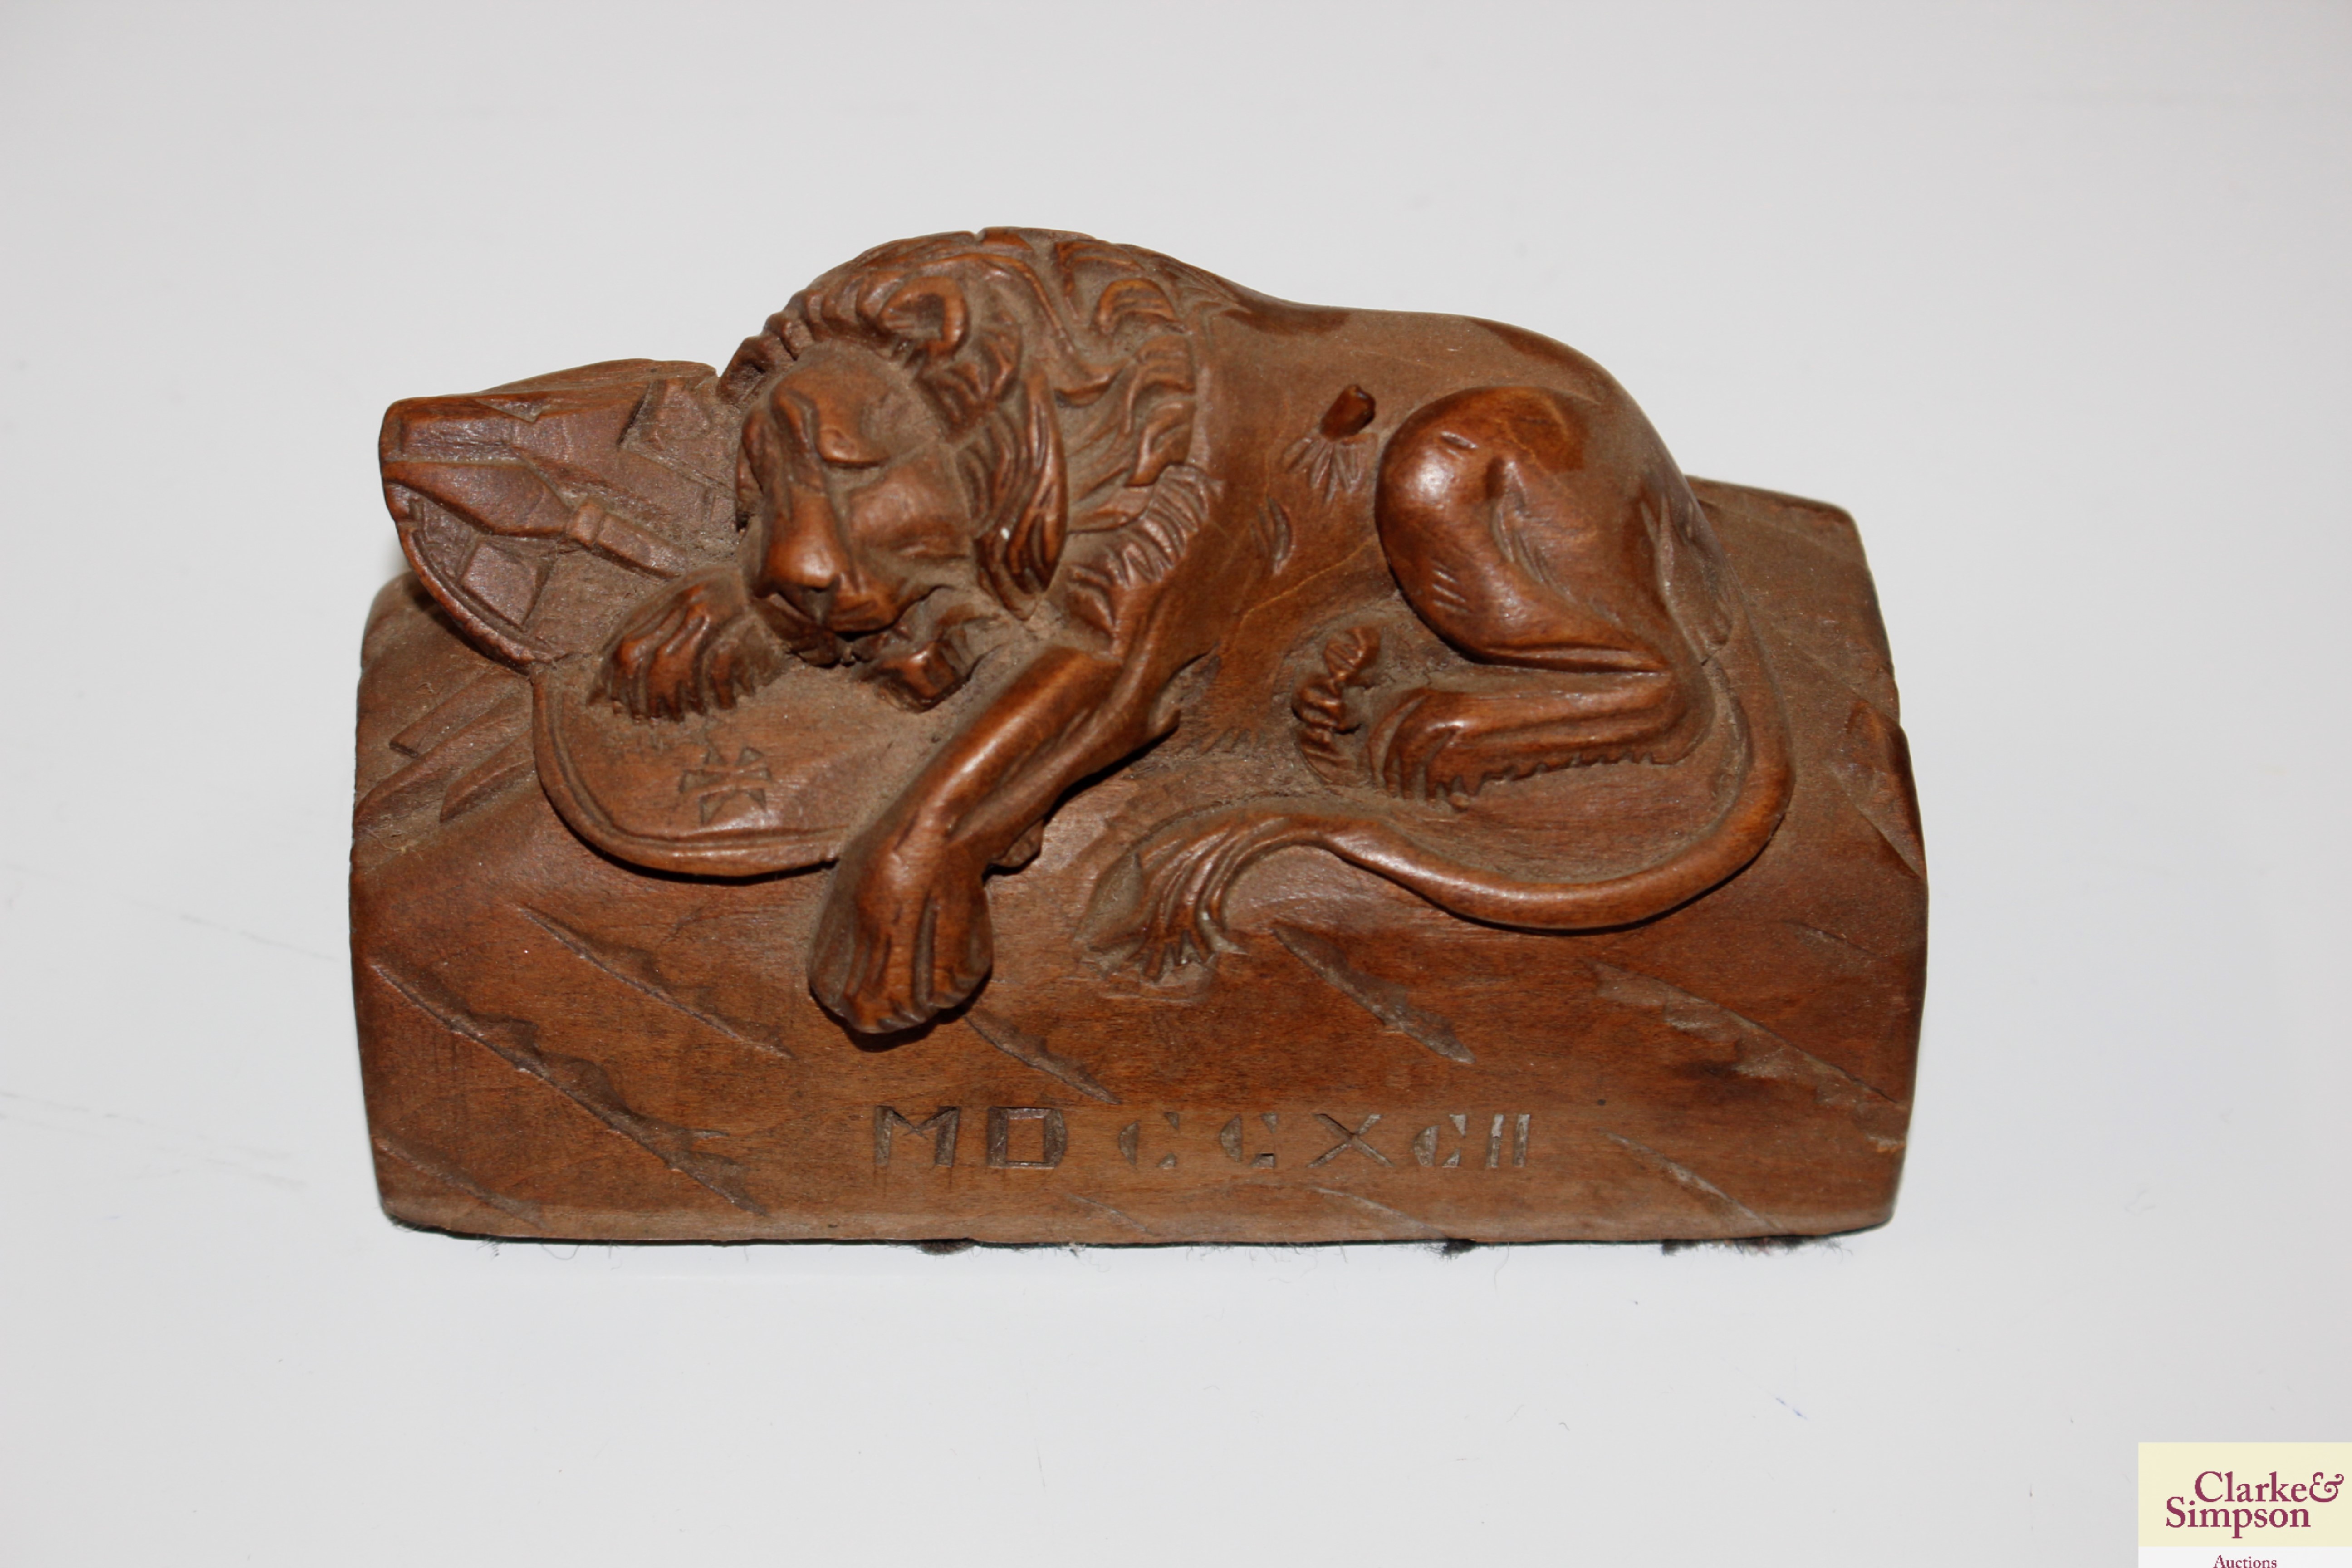 Two floral painted boxes and a carved wooden lion - Image 2 of 3